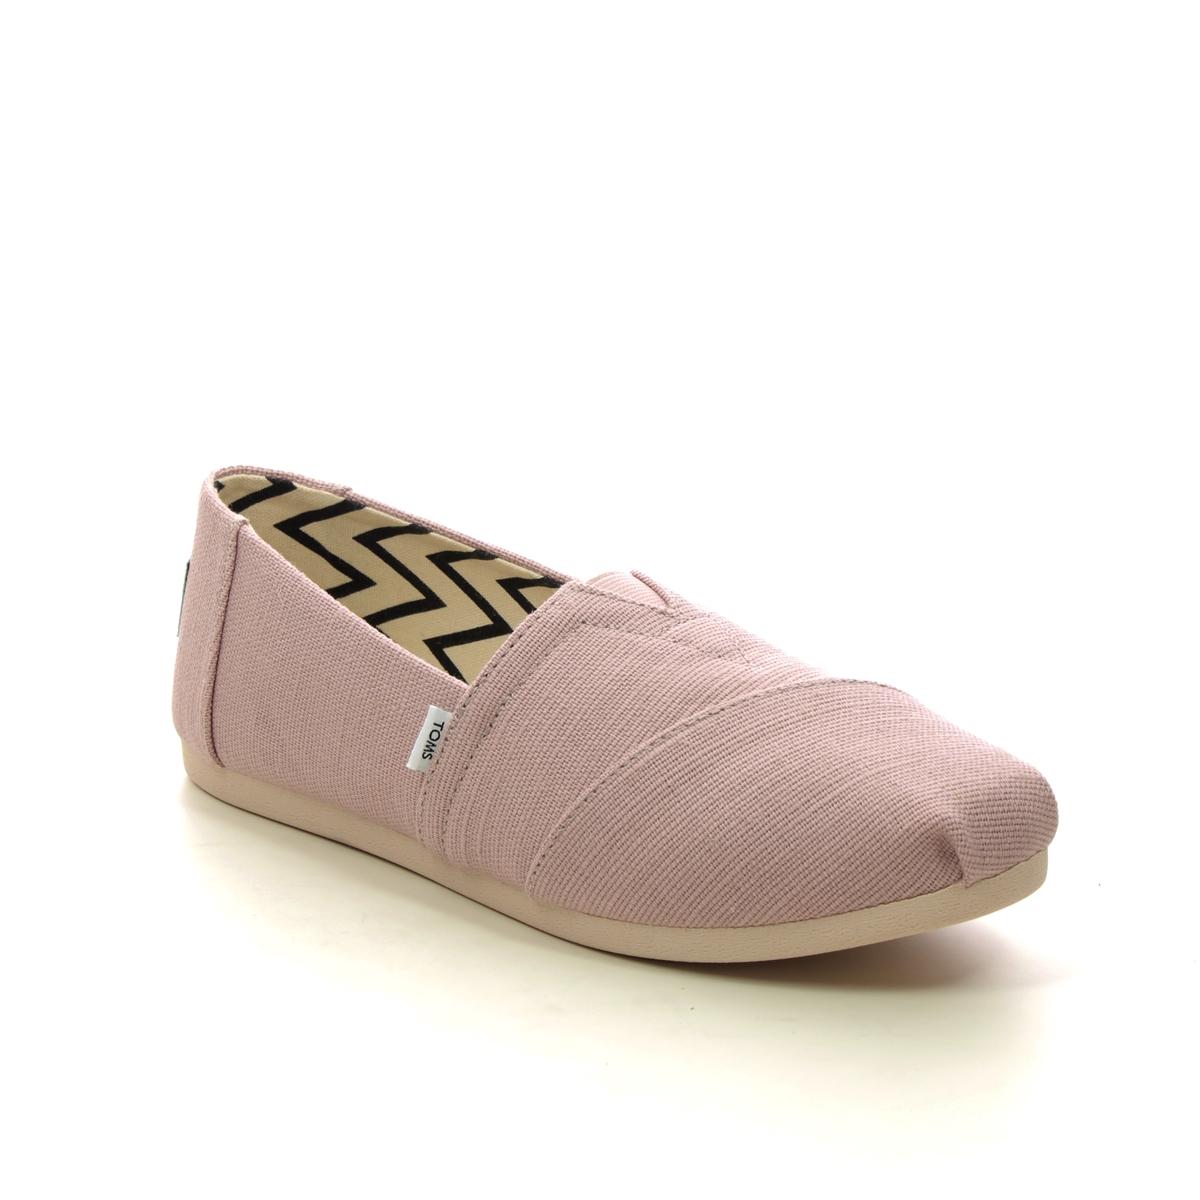 Toms Alpargata Classic Rose pink Womens Espadrilles 10020660-60 in a Plain Canvas in Size 7